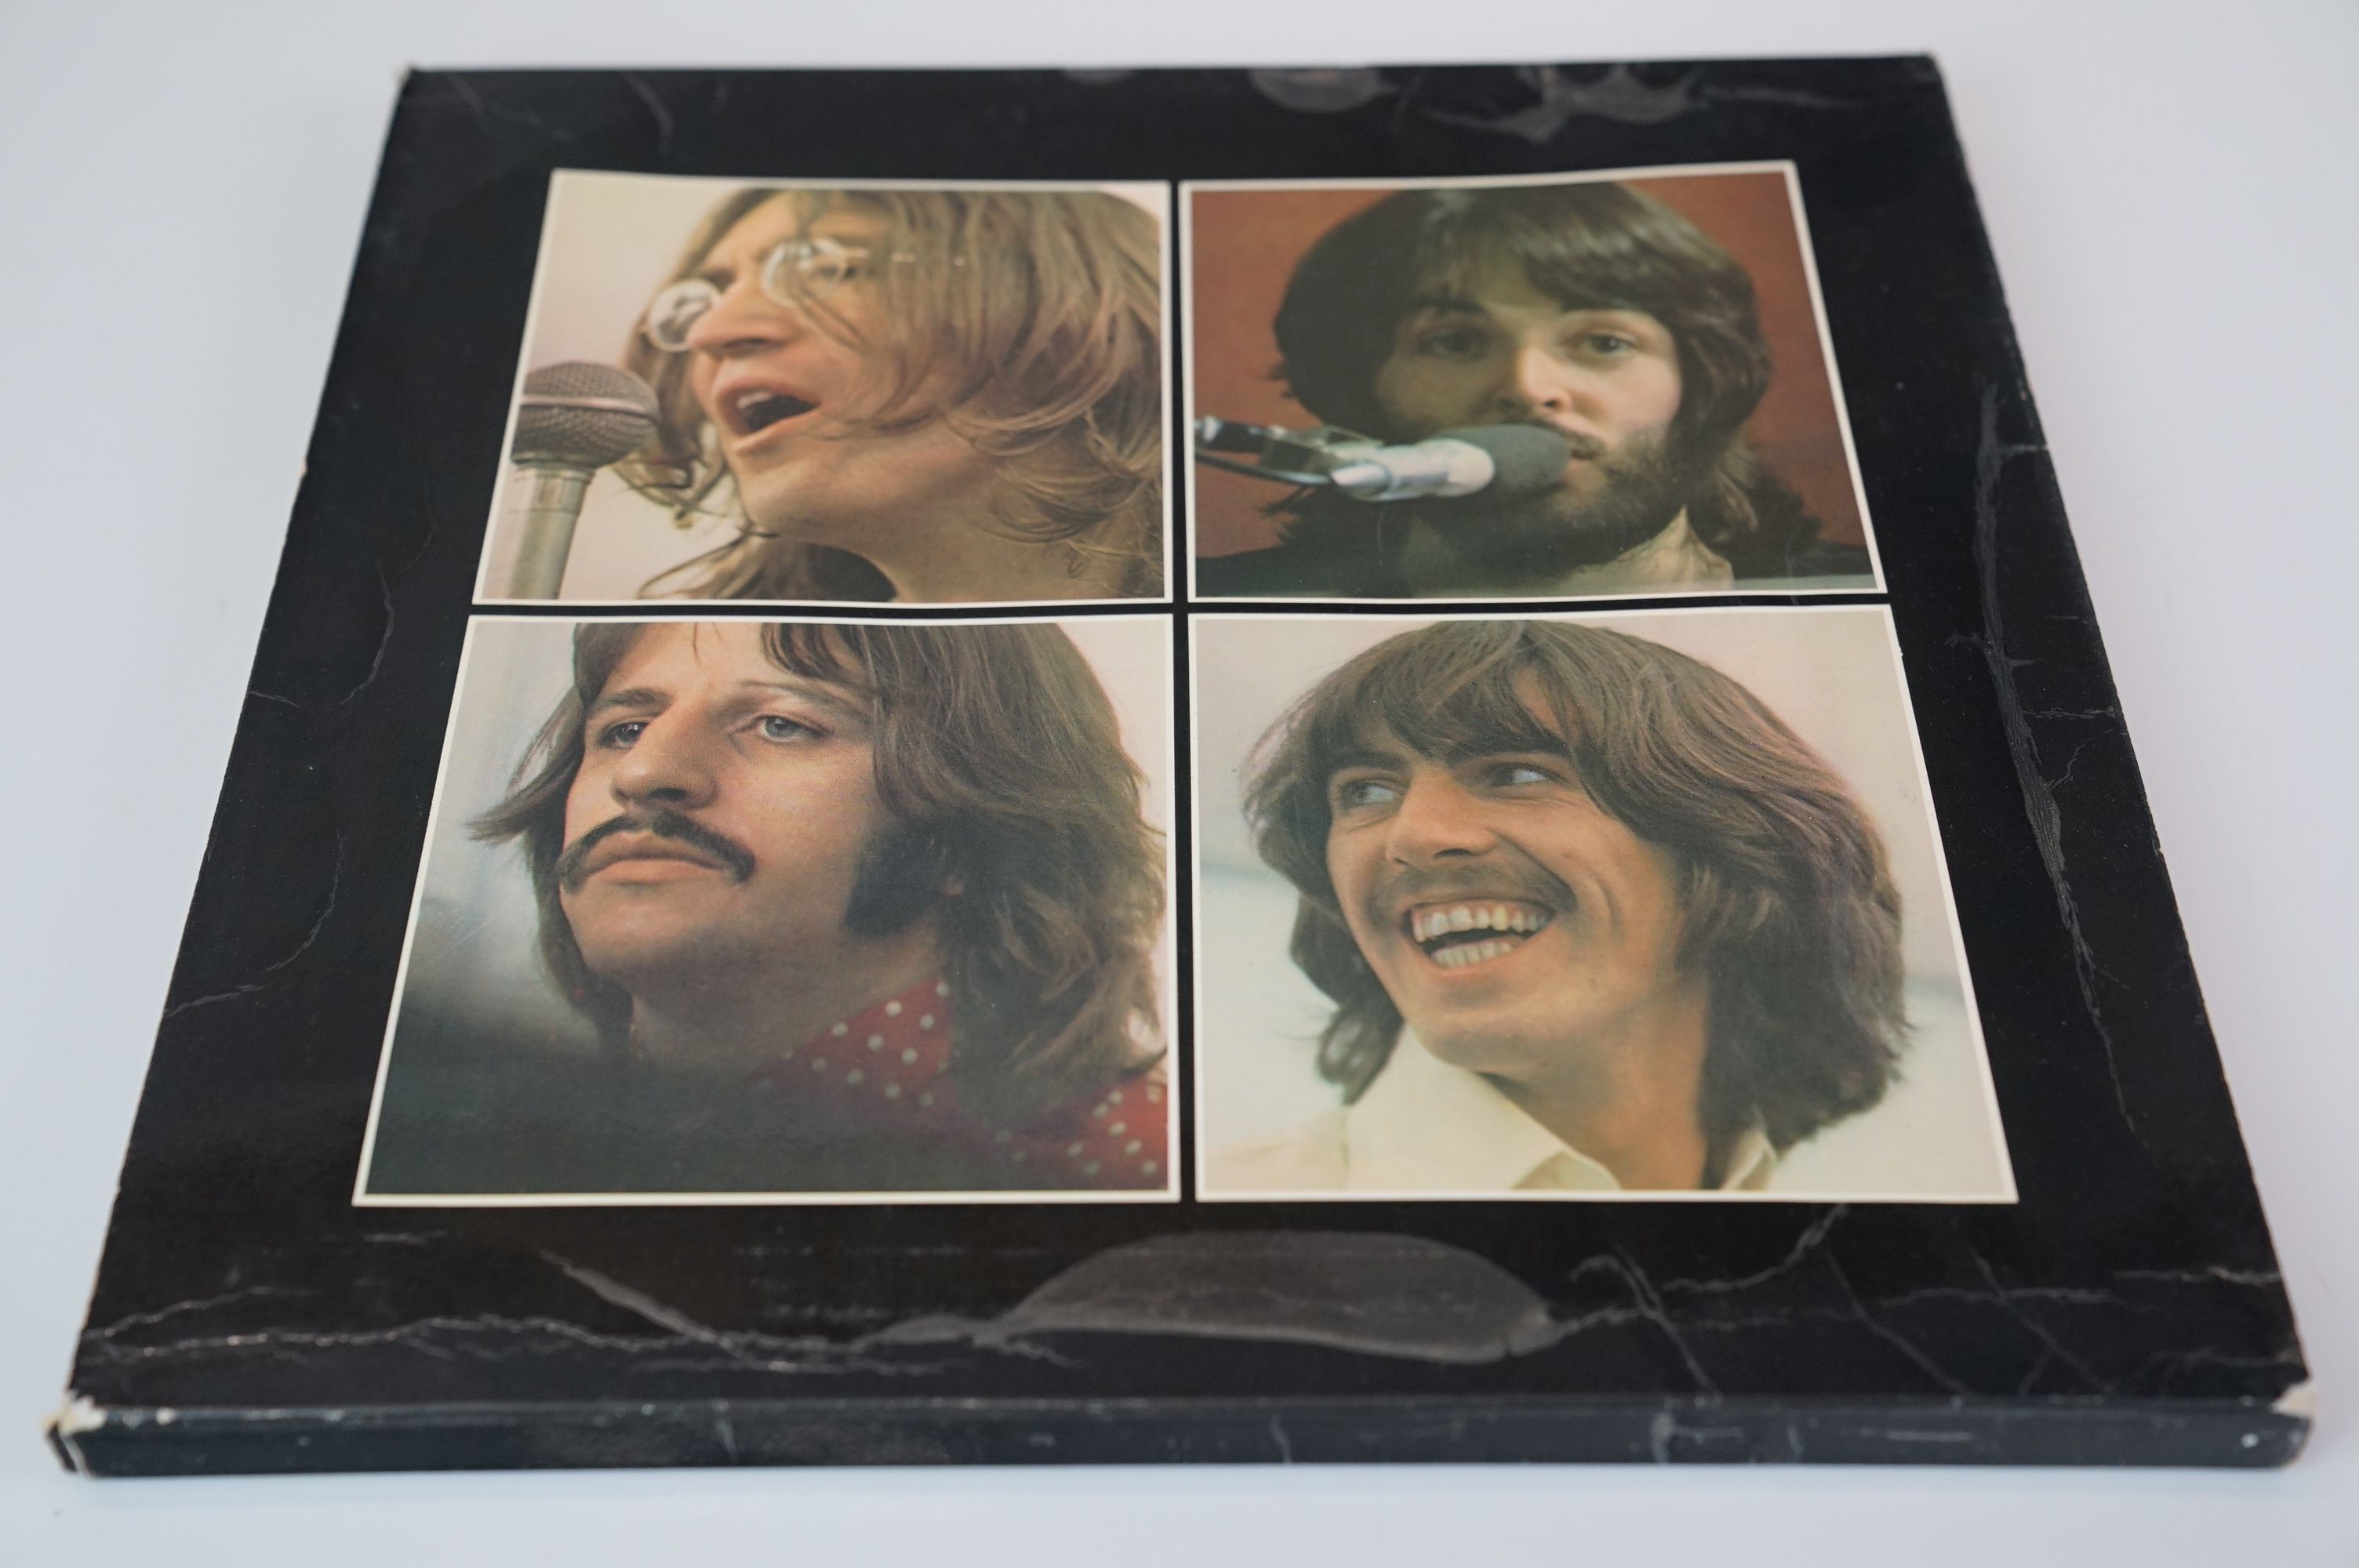 Vinyl - The Beatles Let It Be Box set with record and book, laminated cover, vg overall